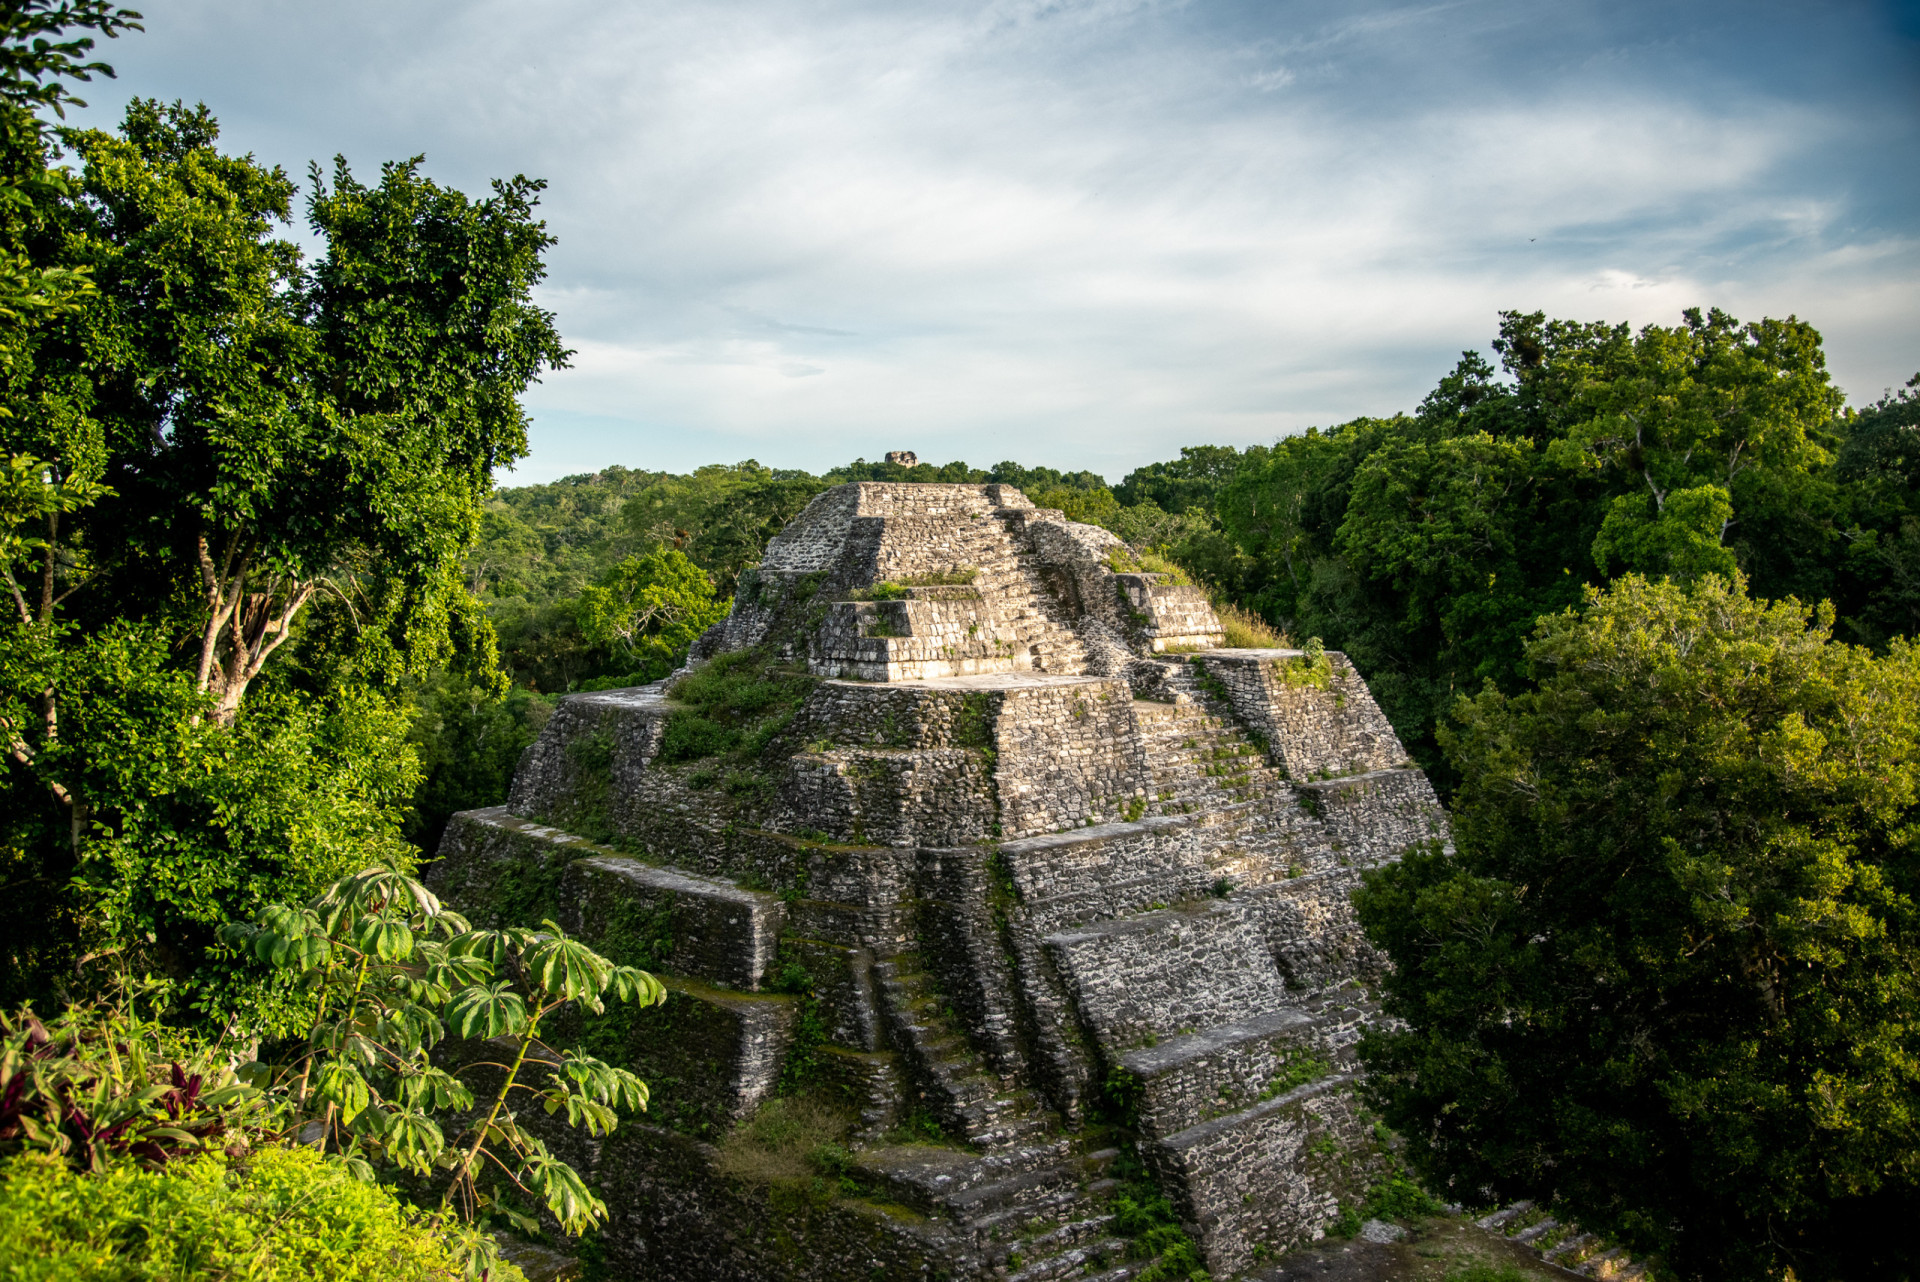 <p>Guatemala's wealth of historic ruins extend to the classic Maya sites of Yaxhá, Nakum, and El Naranjo. This venerable trio of ancient structures stand on a hill in a national park between two sizable lakes, Lago Yaxhá and Lago Sacnab.</p><p>You may also like:<a href="https://www.starsinsider.com/n/496700?utm_source=msn.com&utm_medium=display&utm_campaign=referral_description&utm_content=627756en-en"> Silly and spooky mythological creatures of North America</a></p>